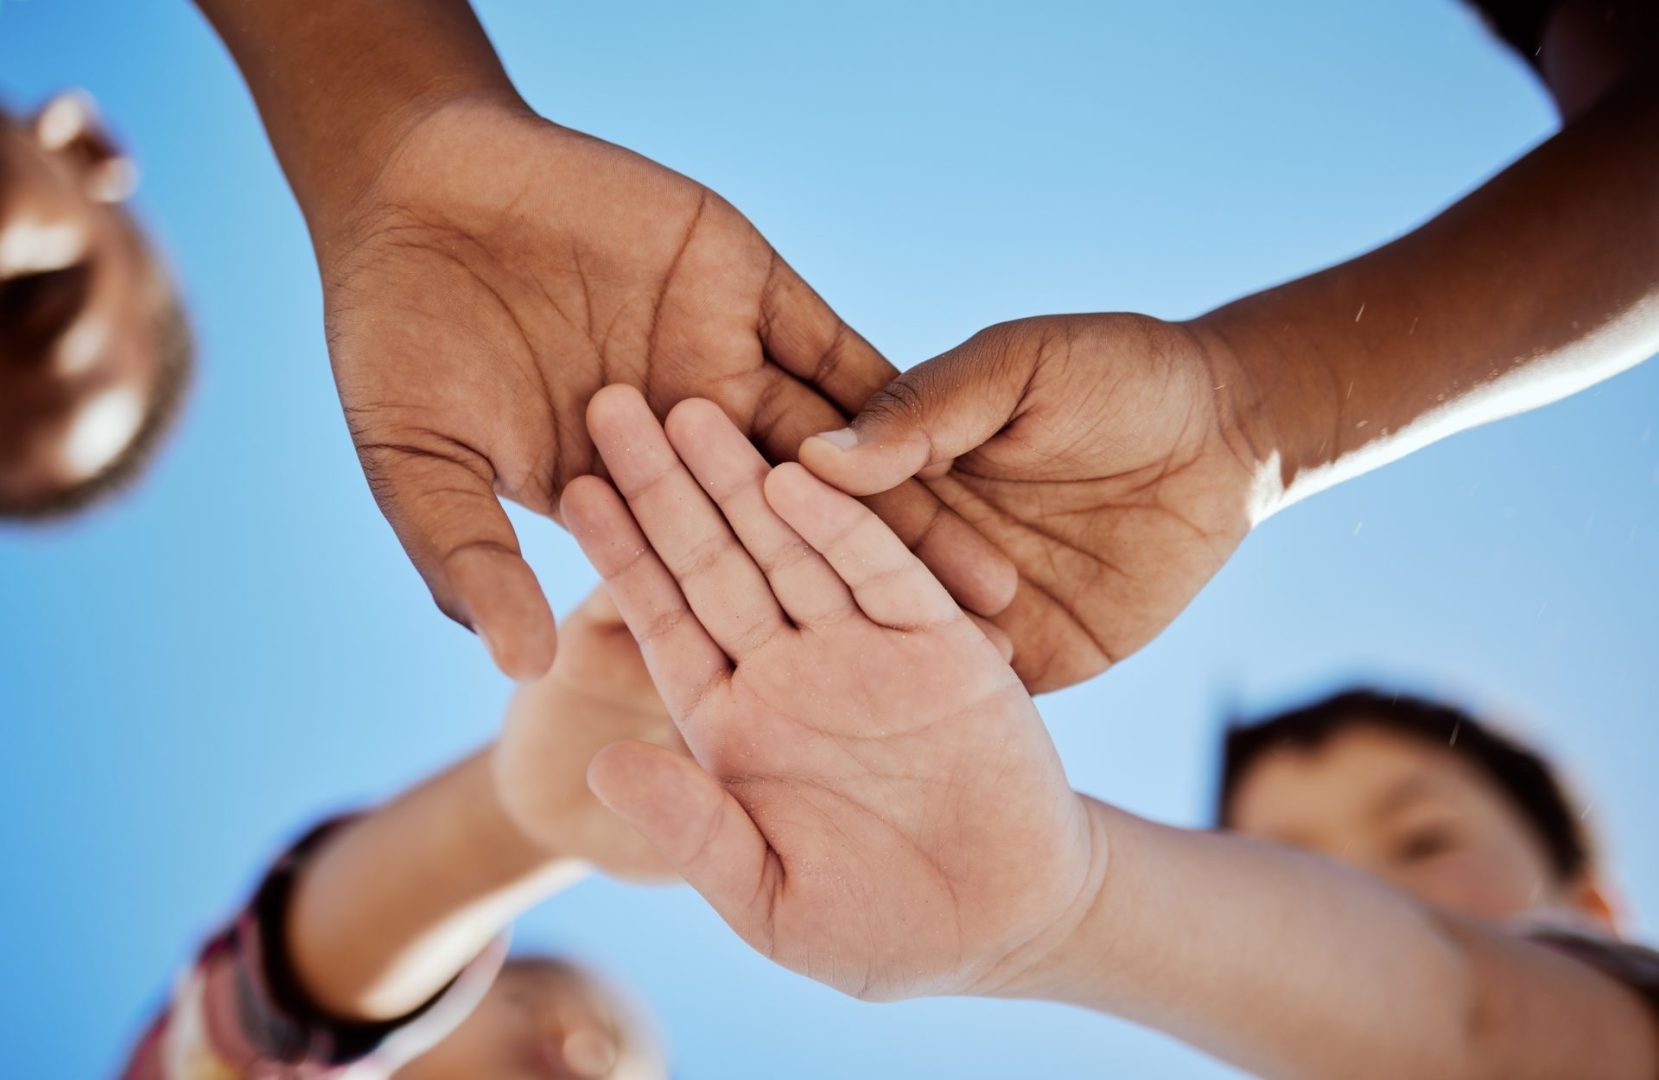 stack of hands and children in unity, support or solidarity with a blue sky background.